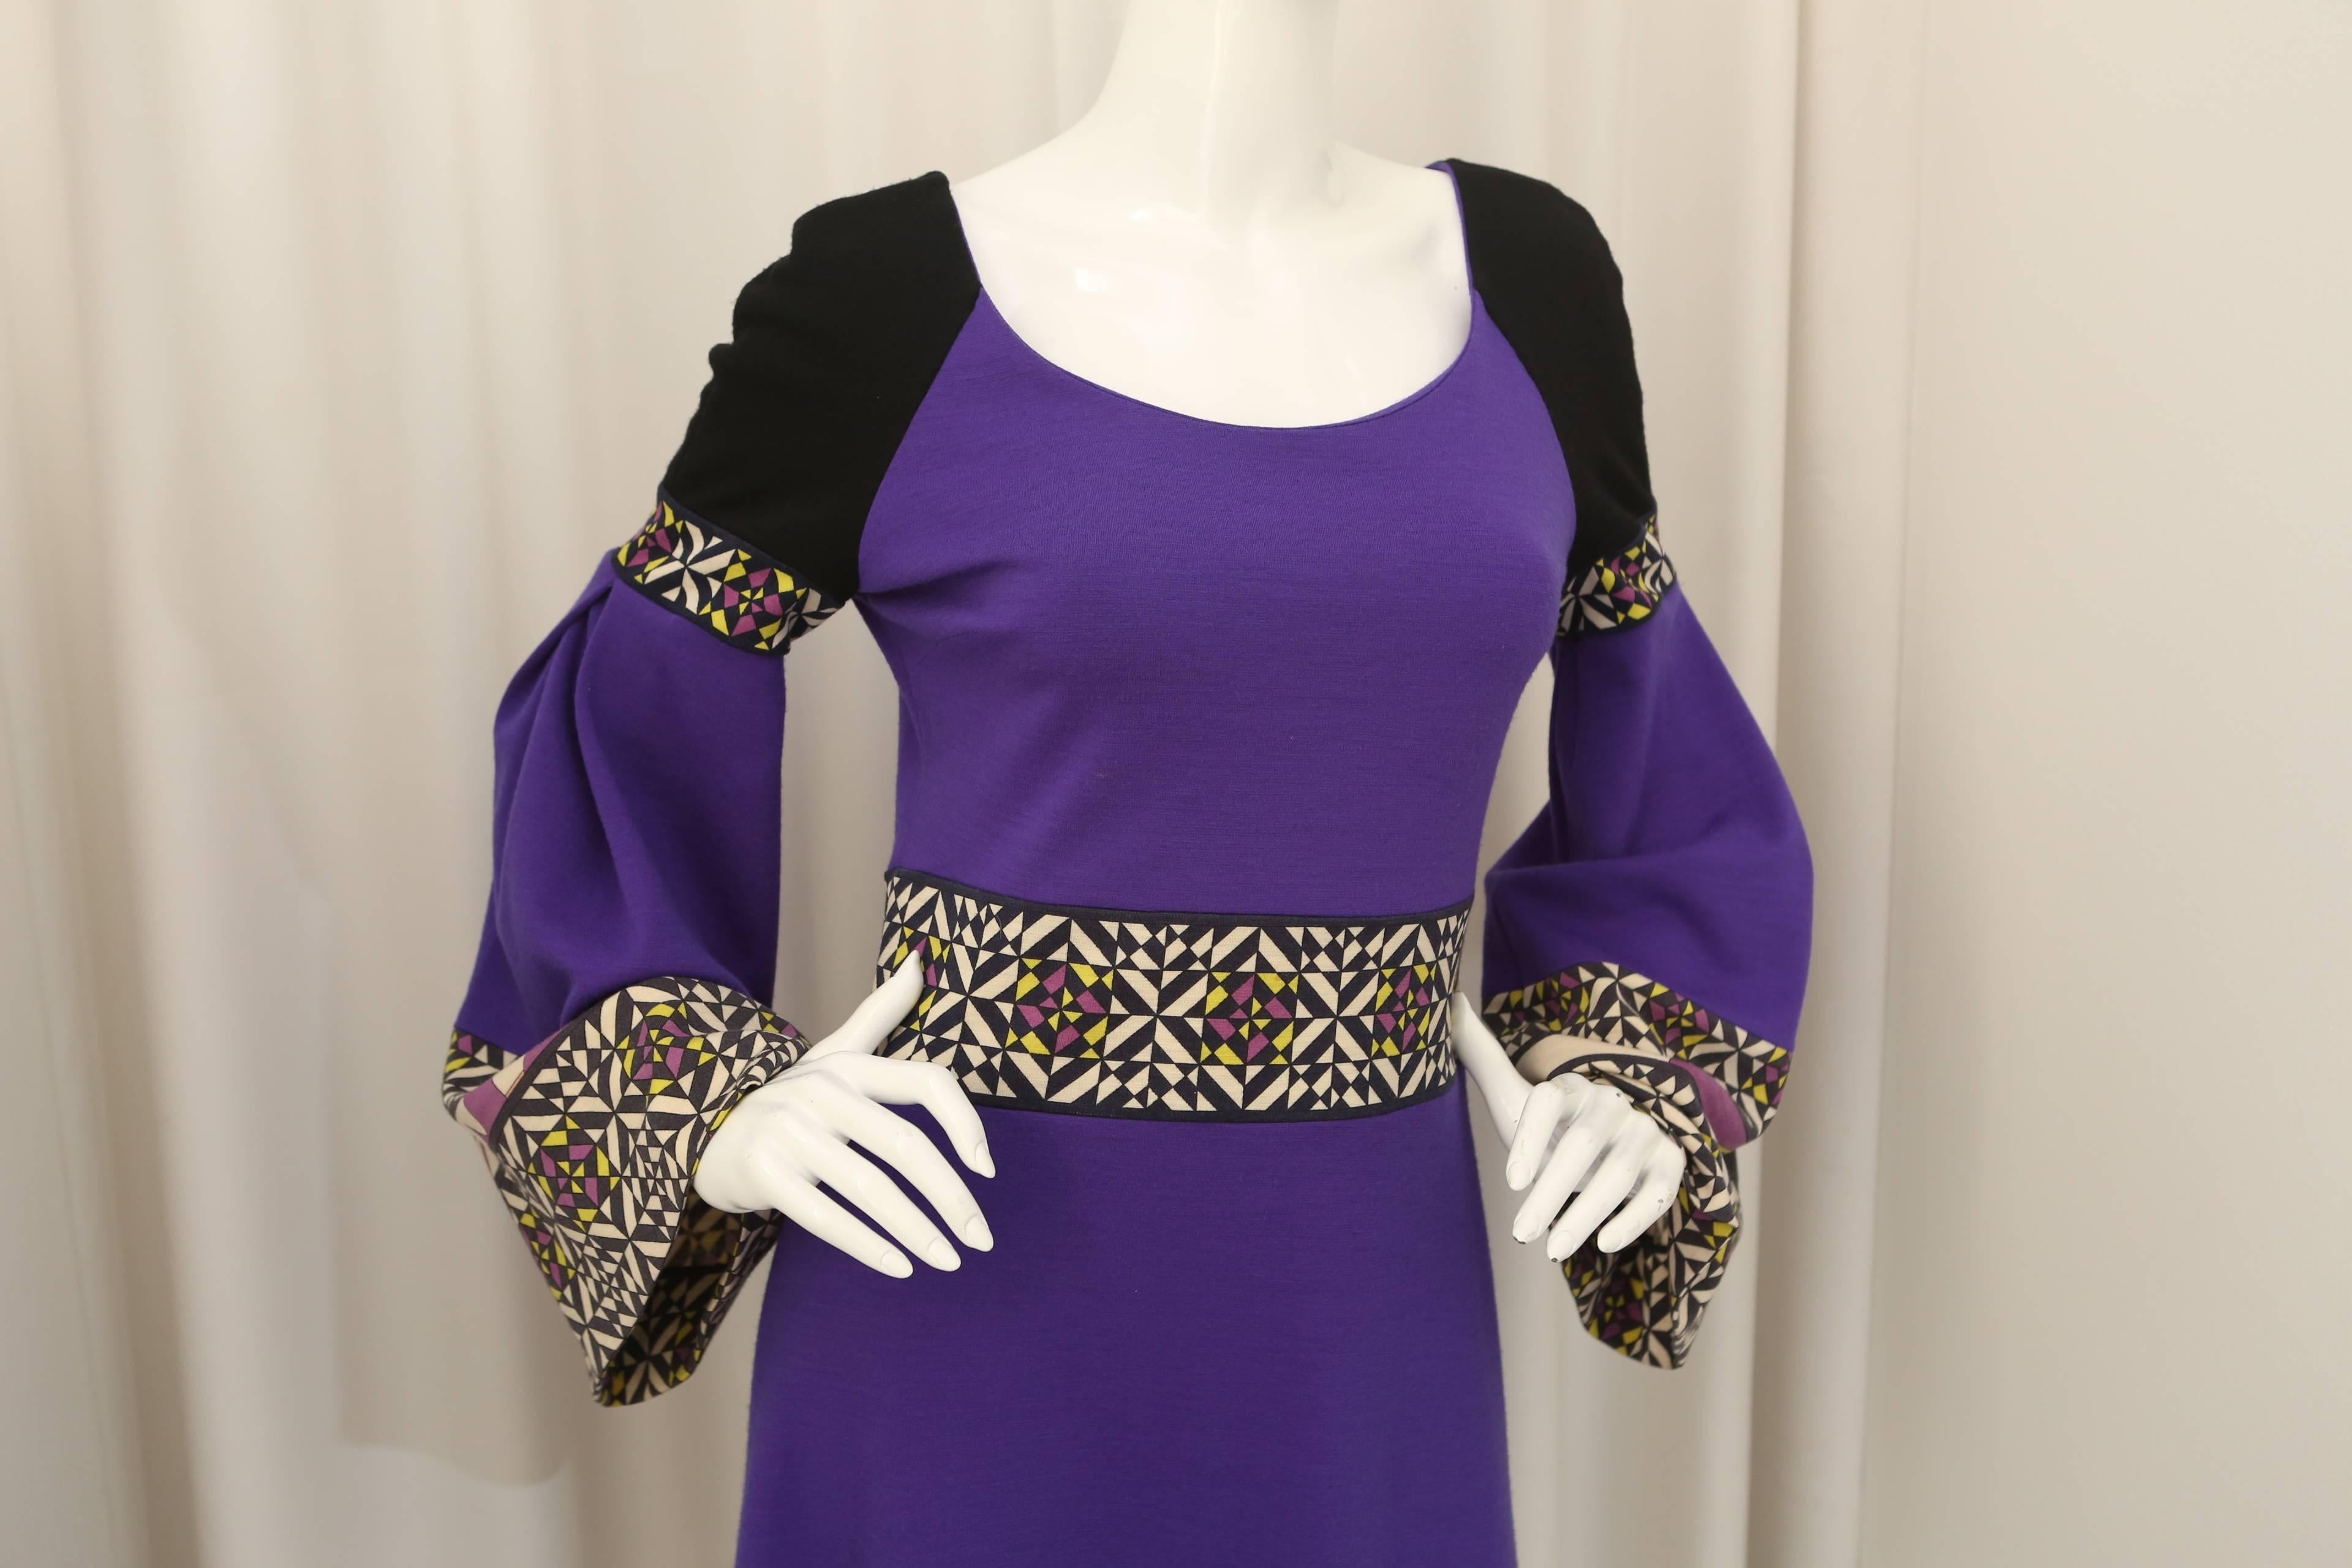 Emilio Pucci purple/multi colored dress with print on the waist, bottom and sleeves.  Boat style neck with bell sleeves.  